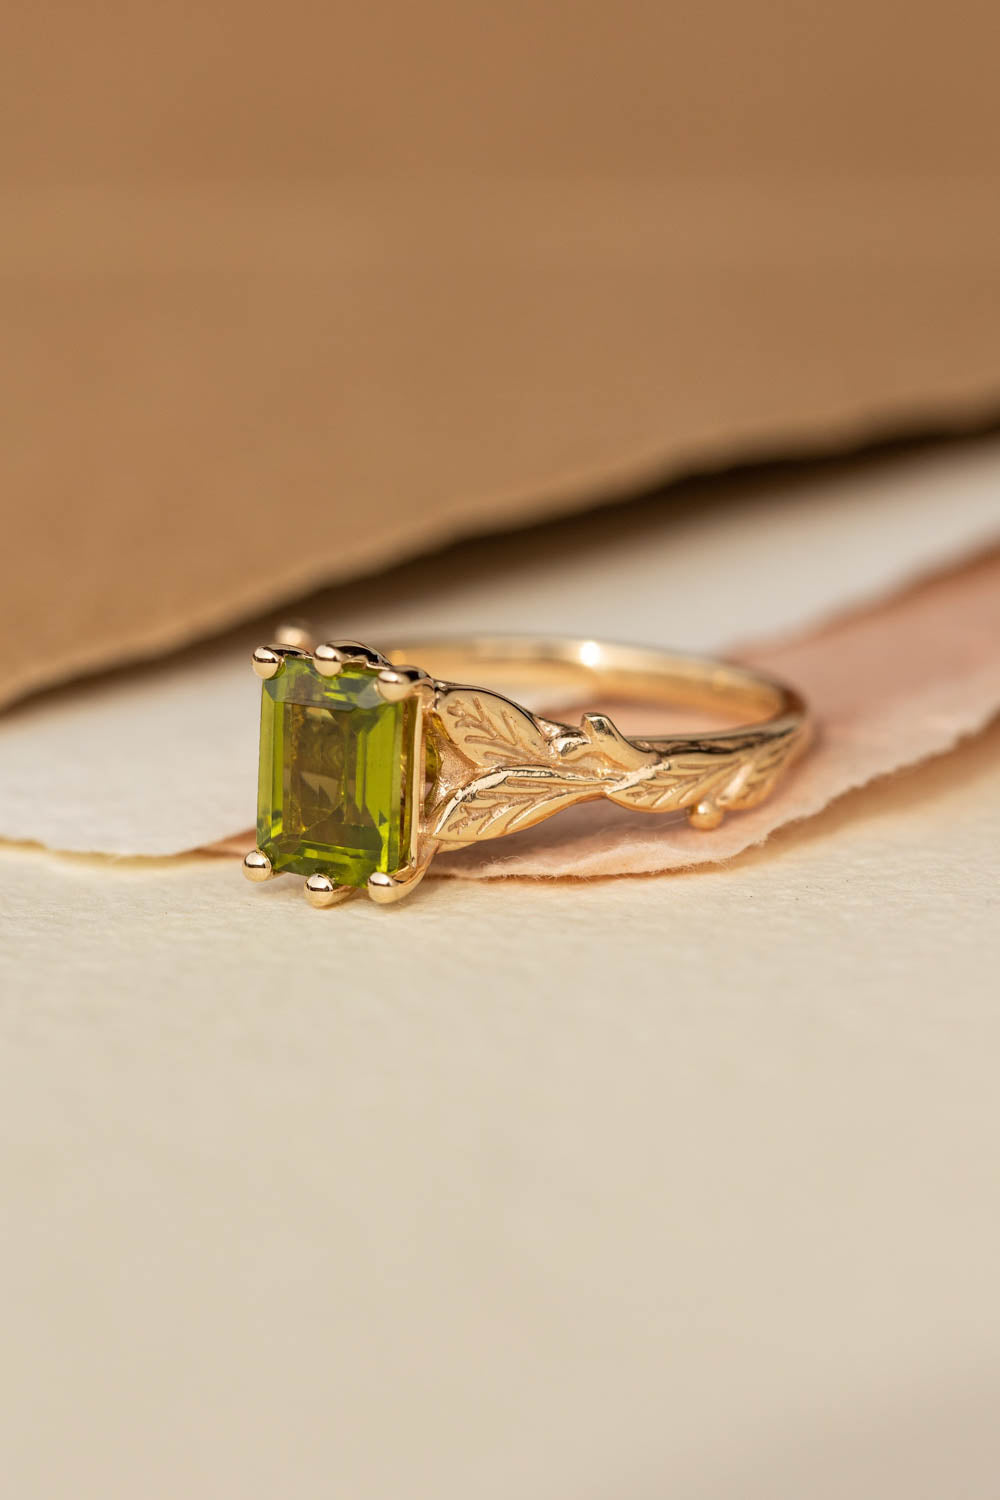 Octagon peridot engagement ring, nature themed branch proposal ring / Freesia - Eden Garden Jewelry™